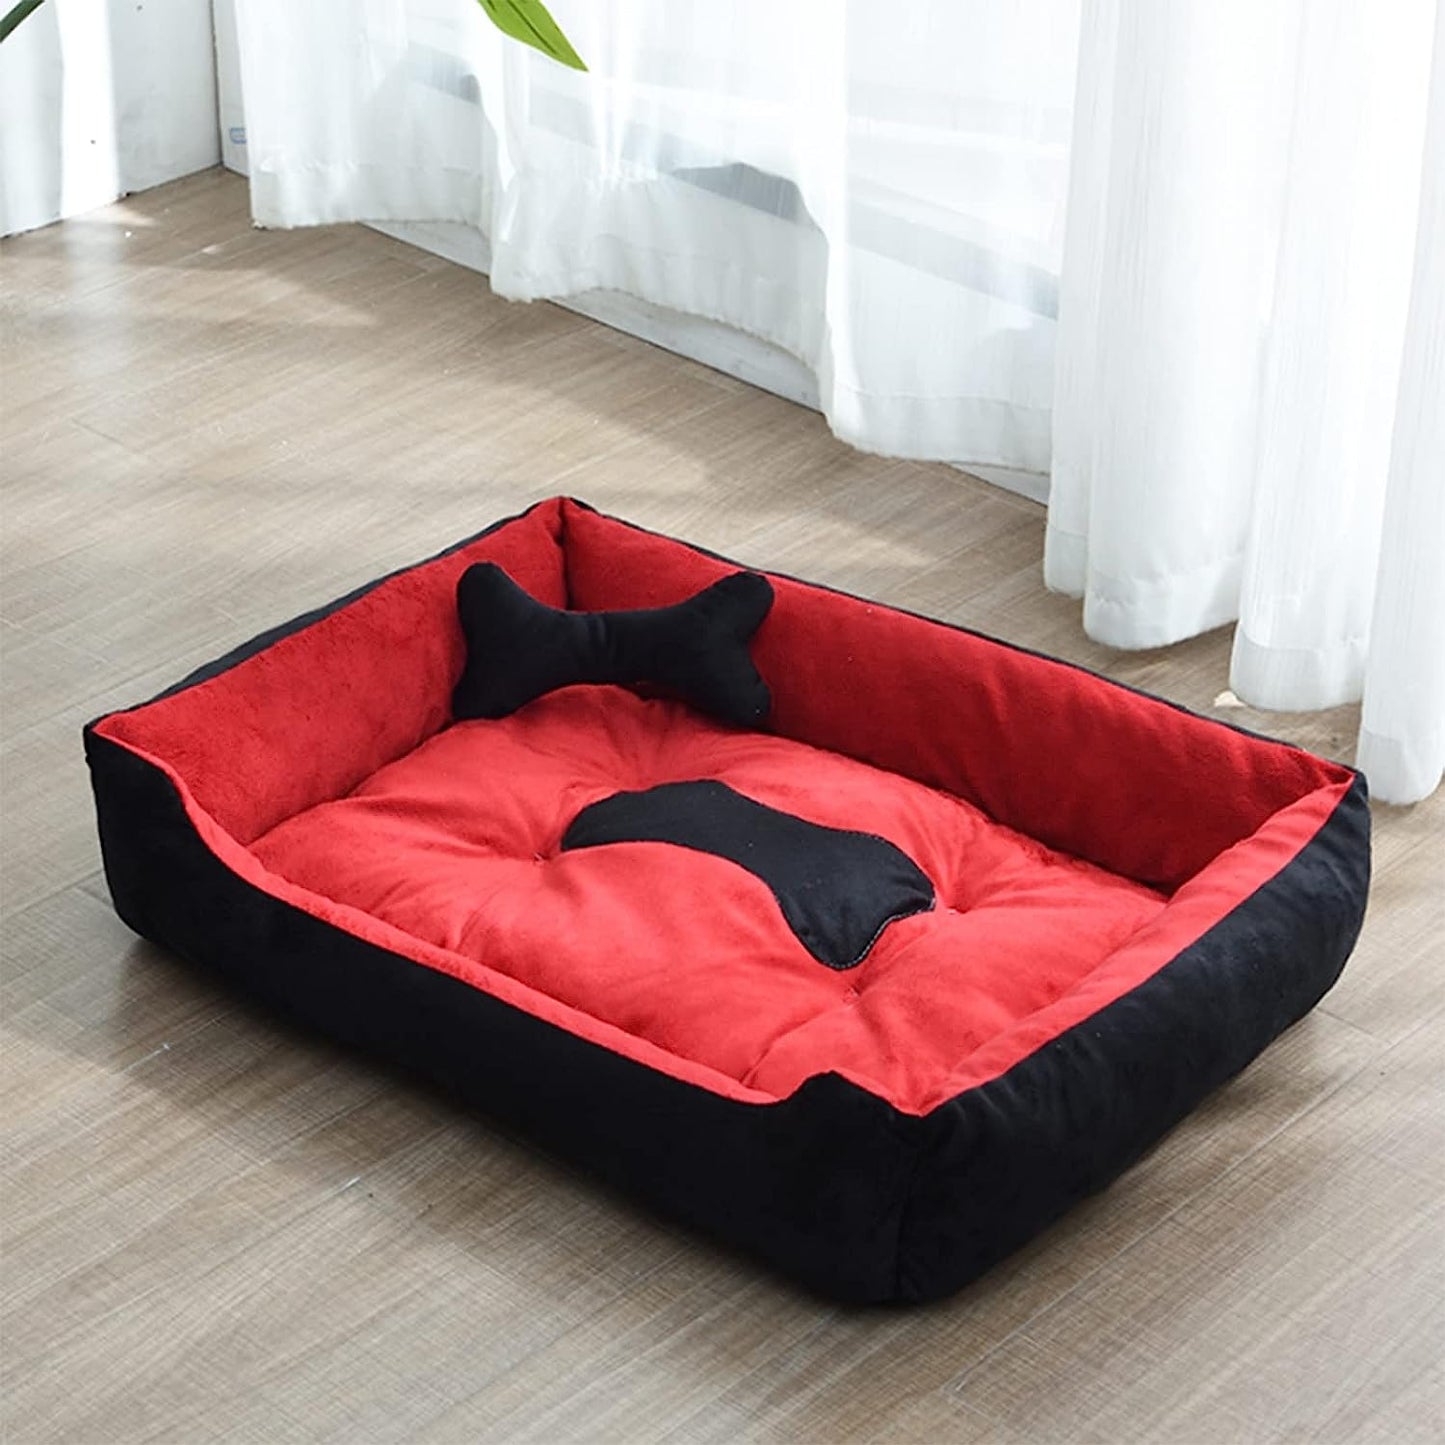 Super Soft Dog Beds Waterproof Bottom - Warm Bed For Dog & Cat - Red and Black